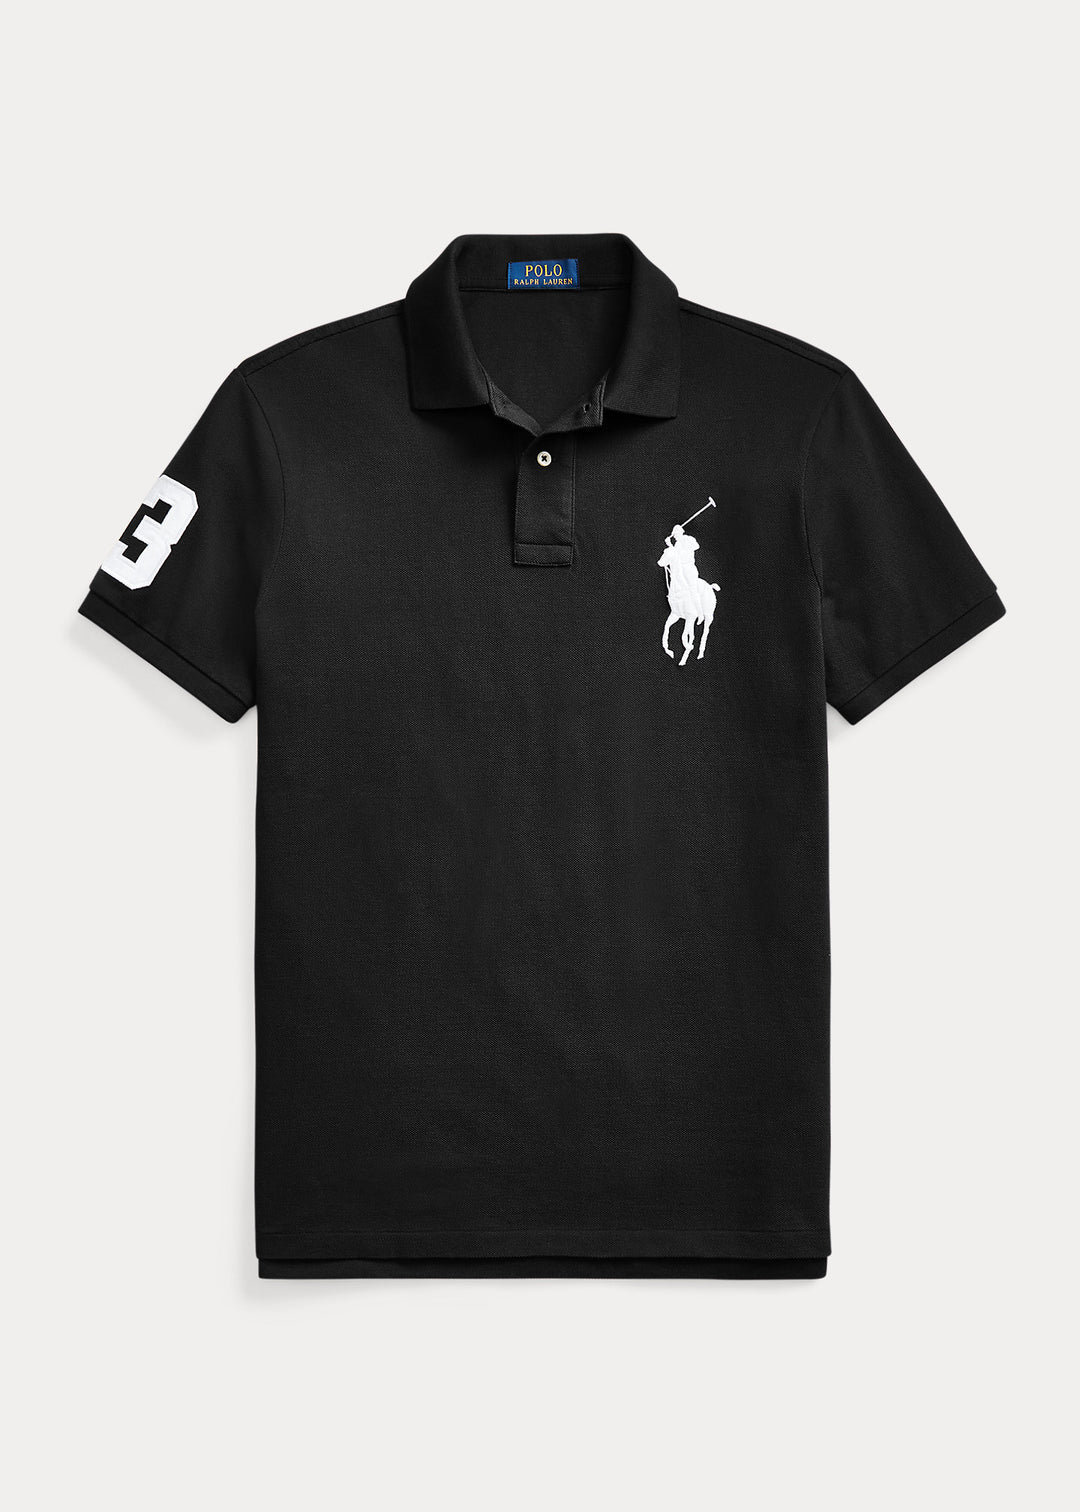 Ralph Lauren Polo Big Pony And Number Shirts Men